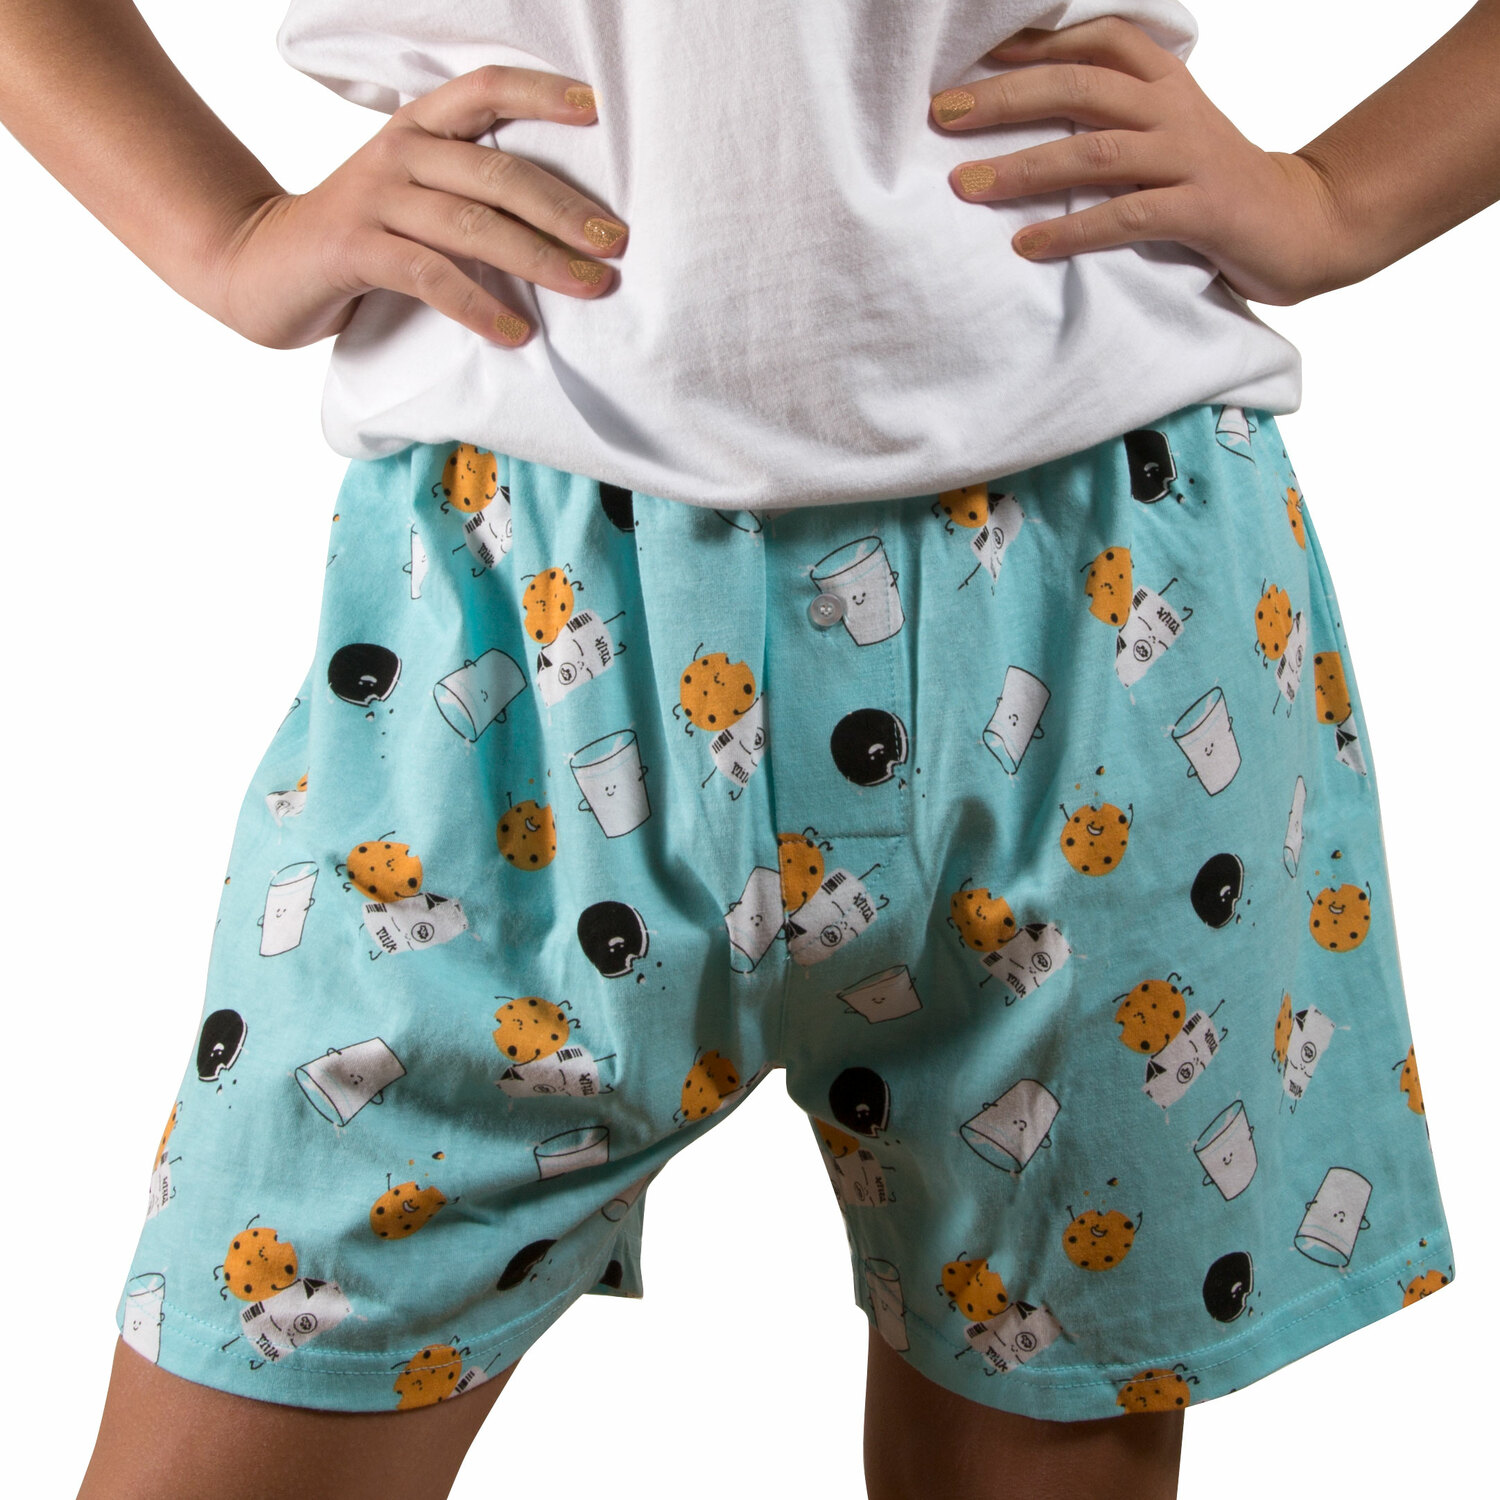 Milk and Cookies by Late Night Snacks - Milk and Cookies - XS Light Blue Unisex Boxers